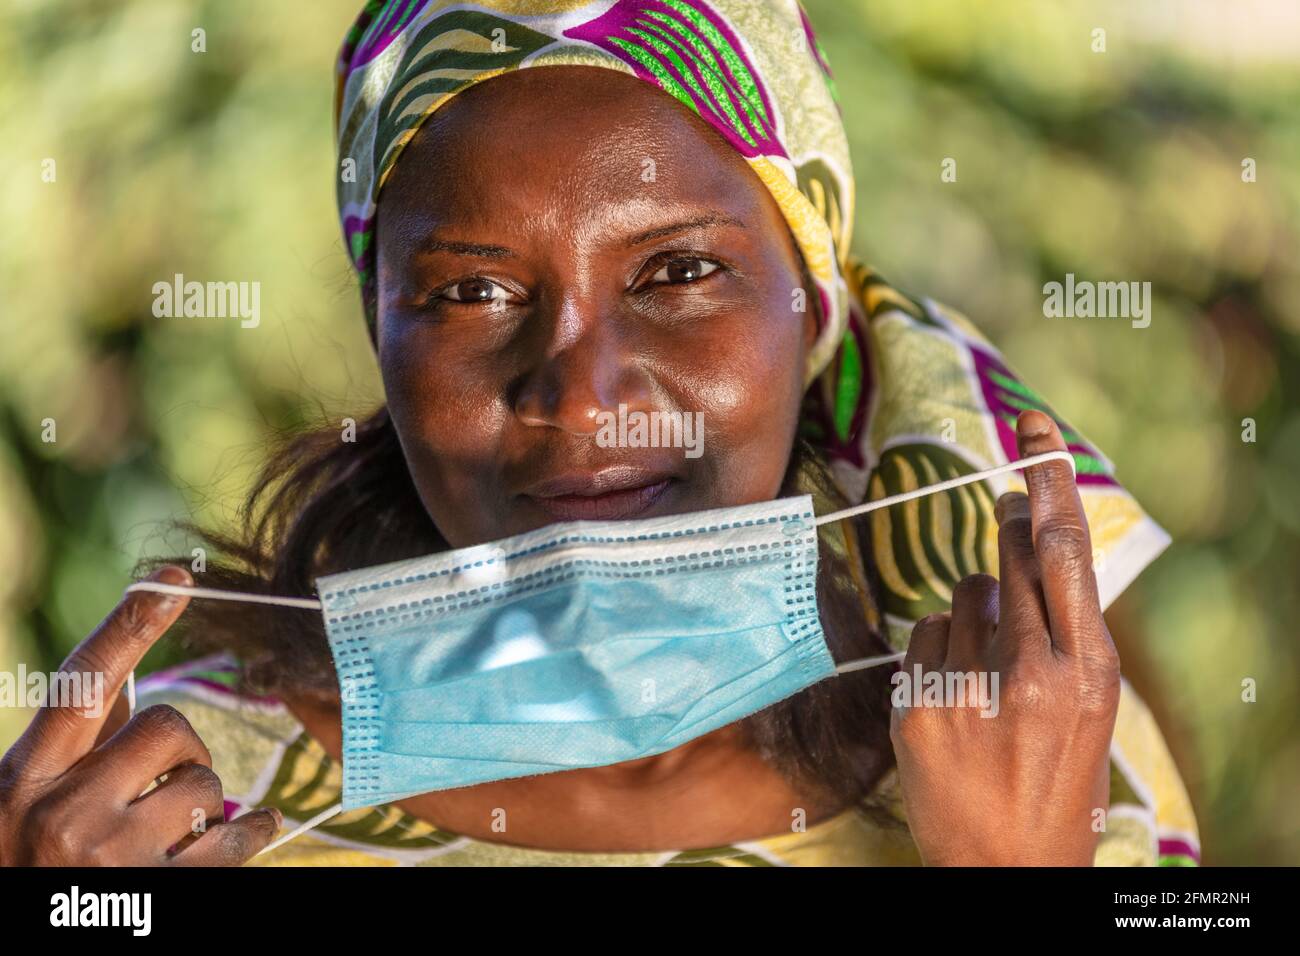 African middle aged woman, female in Africa, wearing traditional clothes and taking off face mask in Coronavirus COVID-19 pandemic Stock Photo